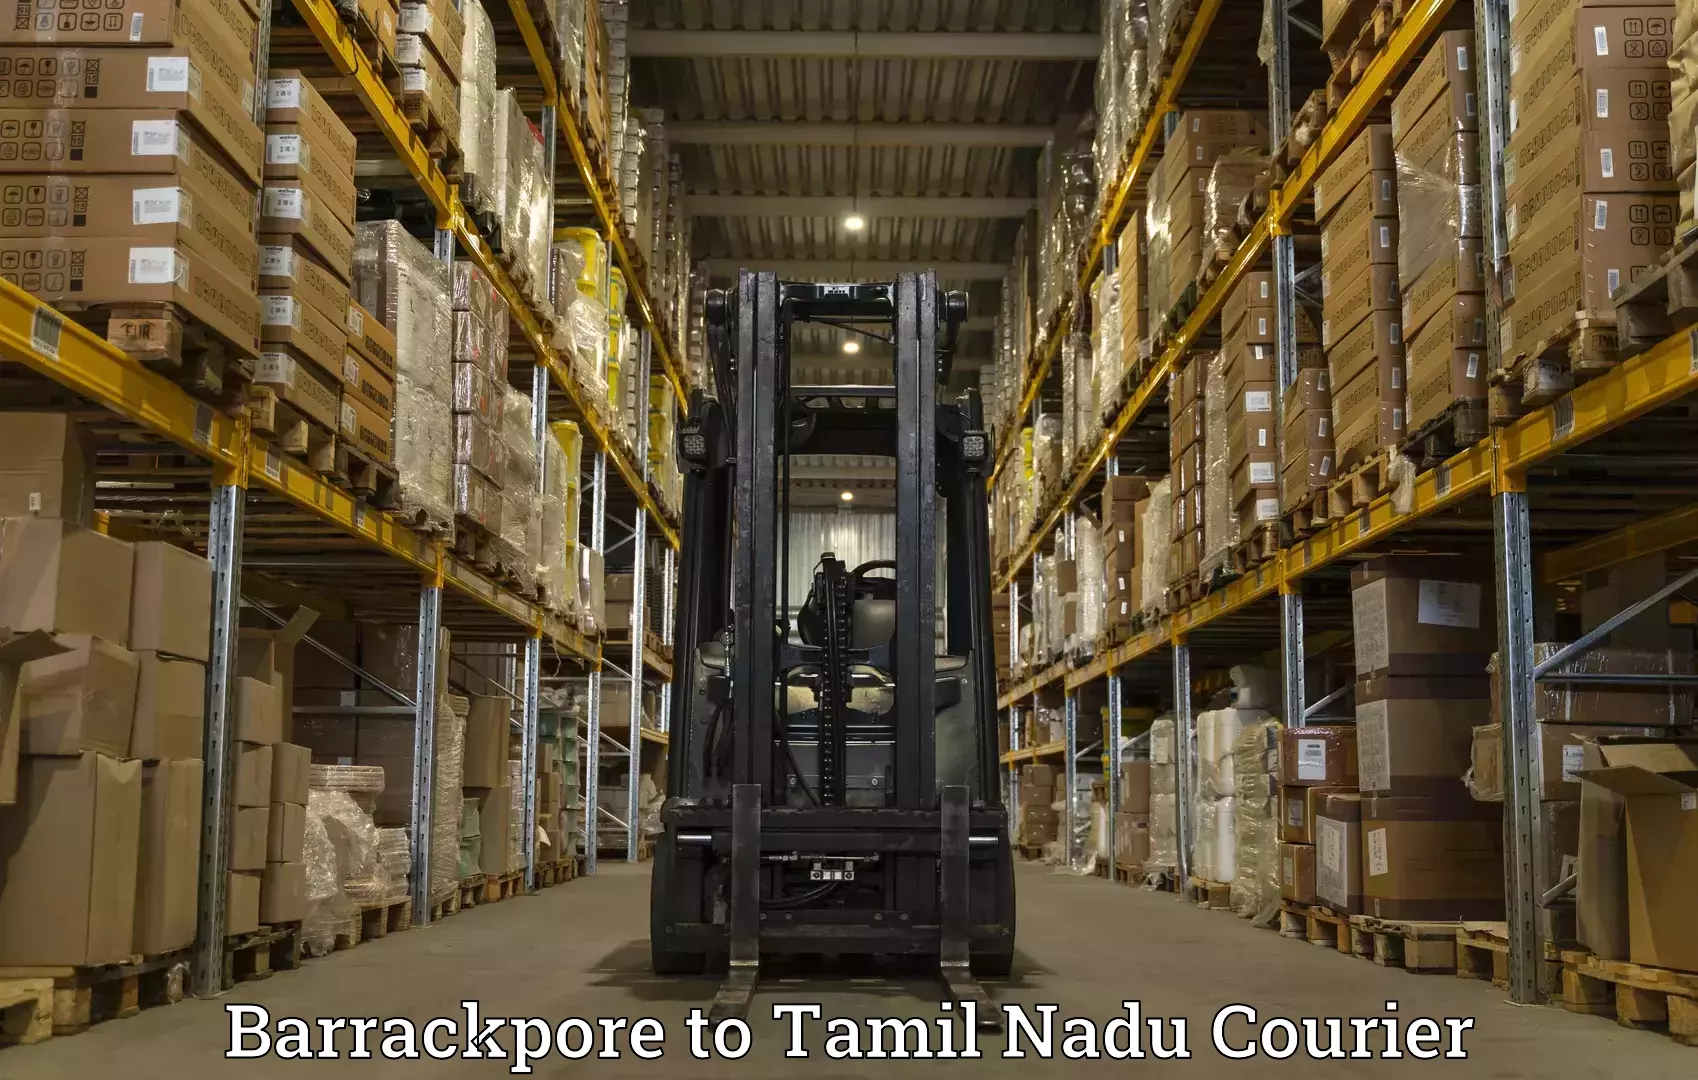 International courier networks Barrackpore to Trichy